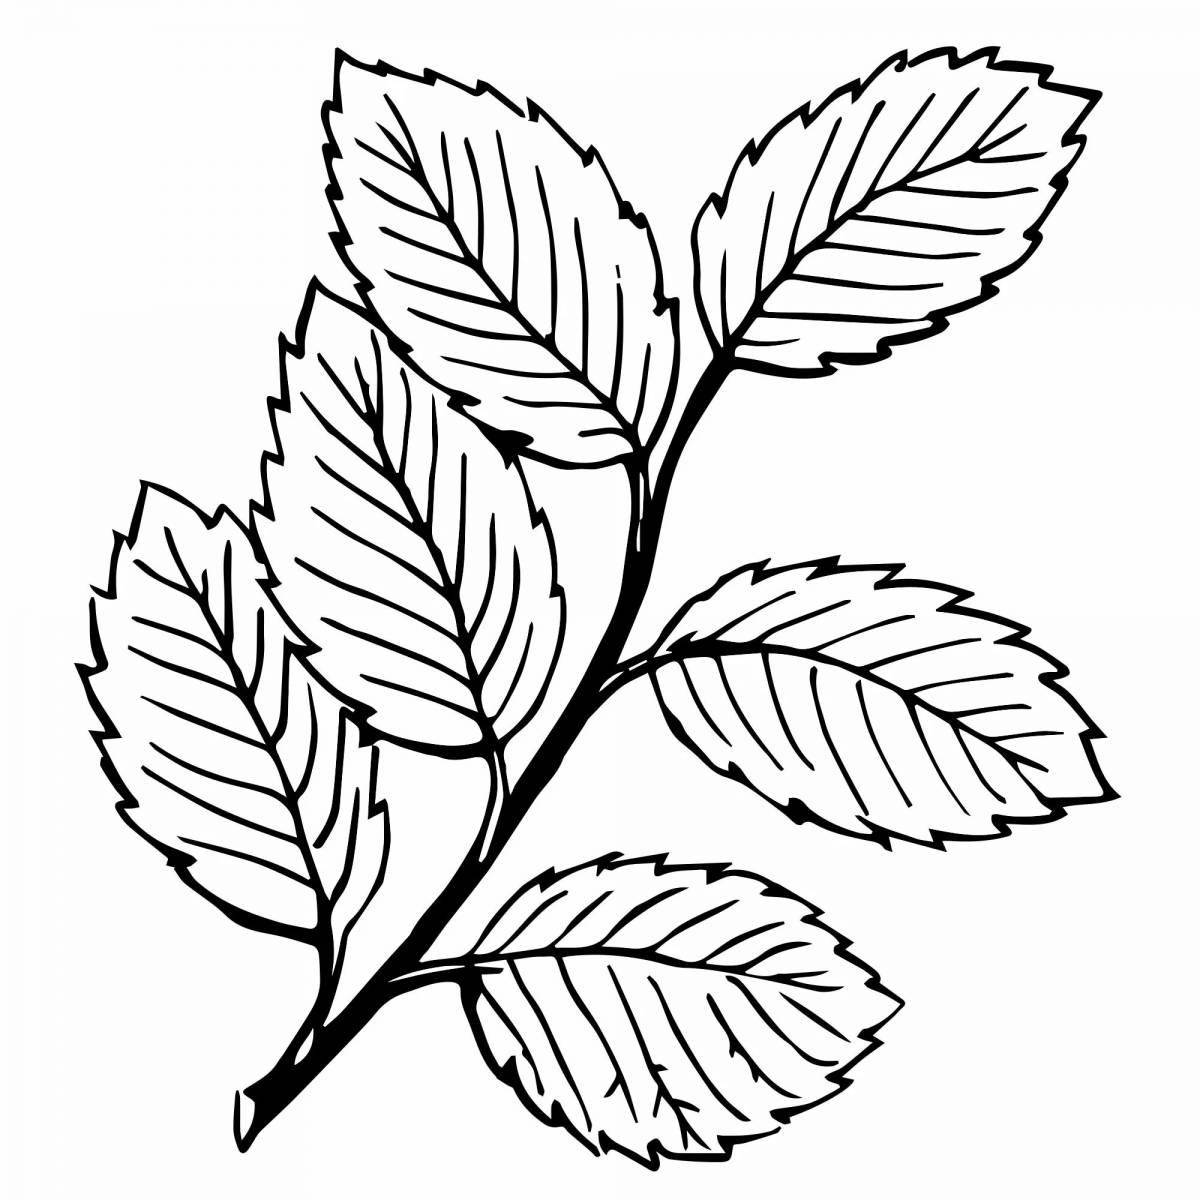 Coloring pages with playful leaves for kids